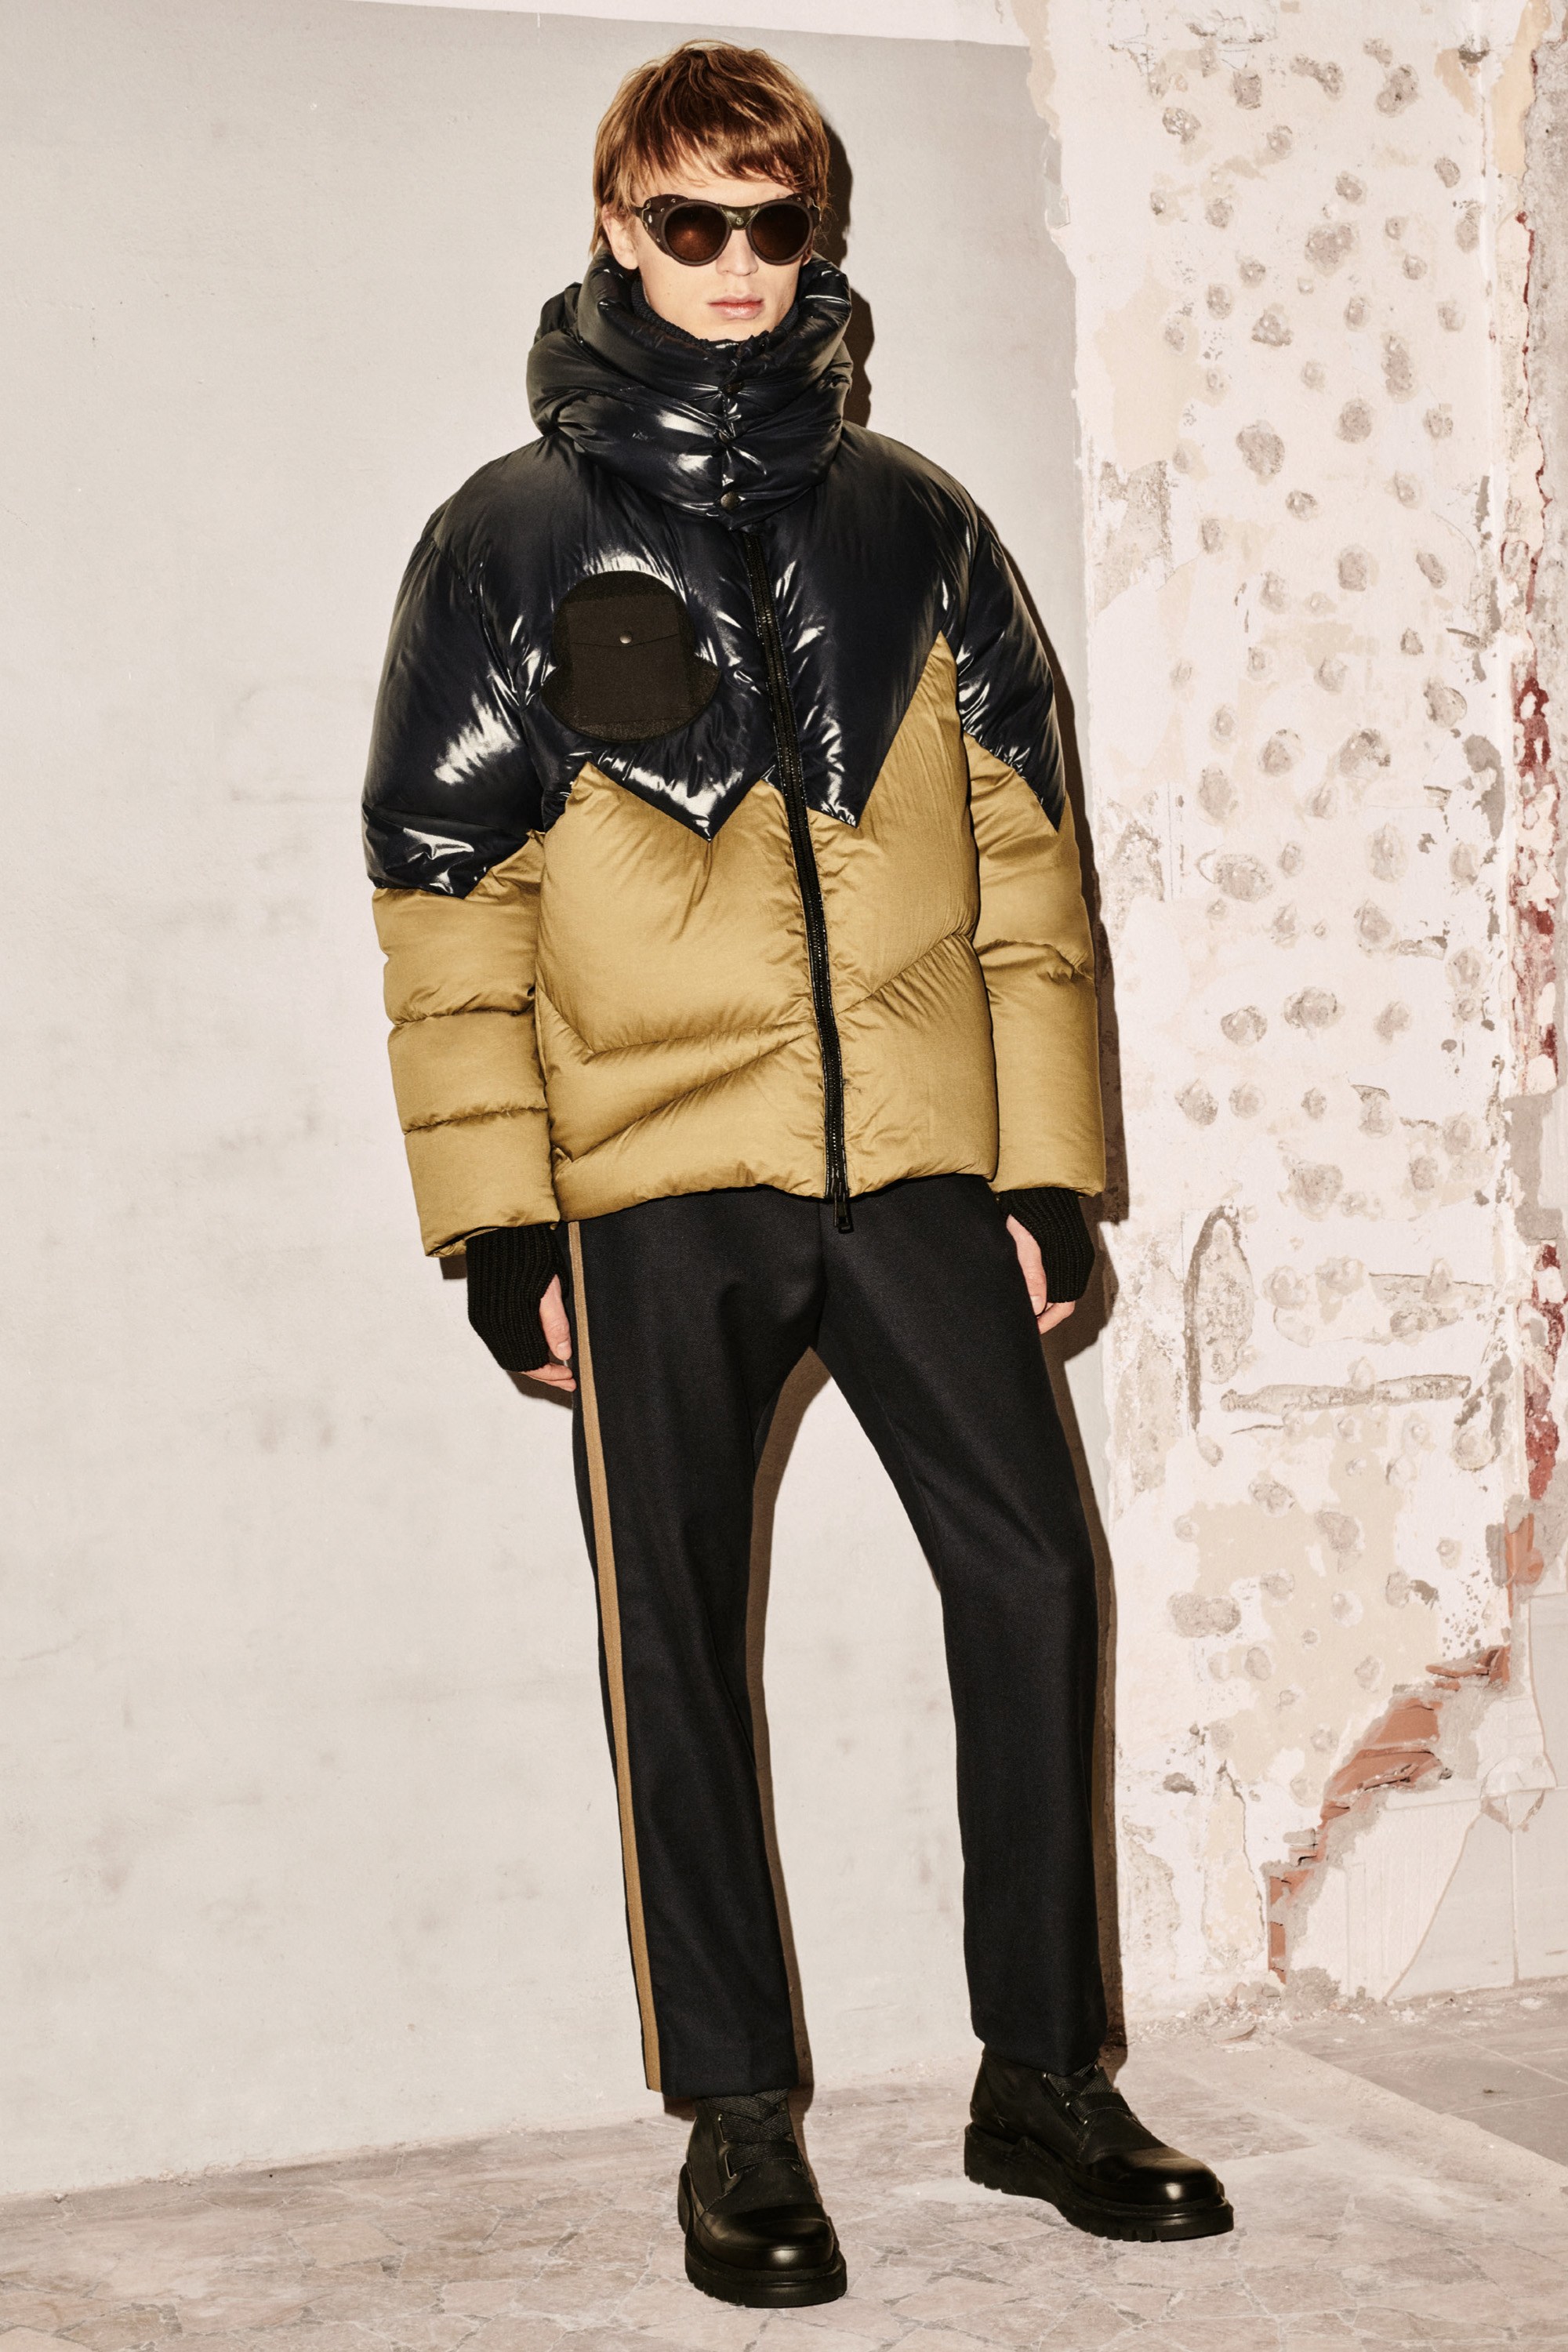 Moncler Fall 2018-1952 Collection by Karl Templer Look 32 – Mr. 布雷蕭